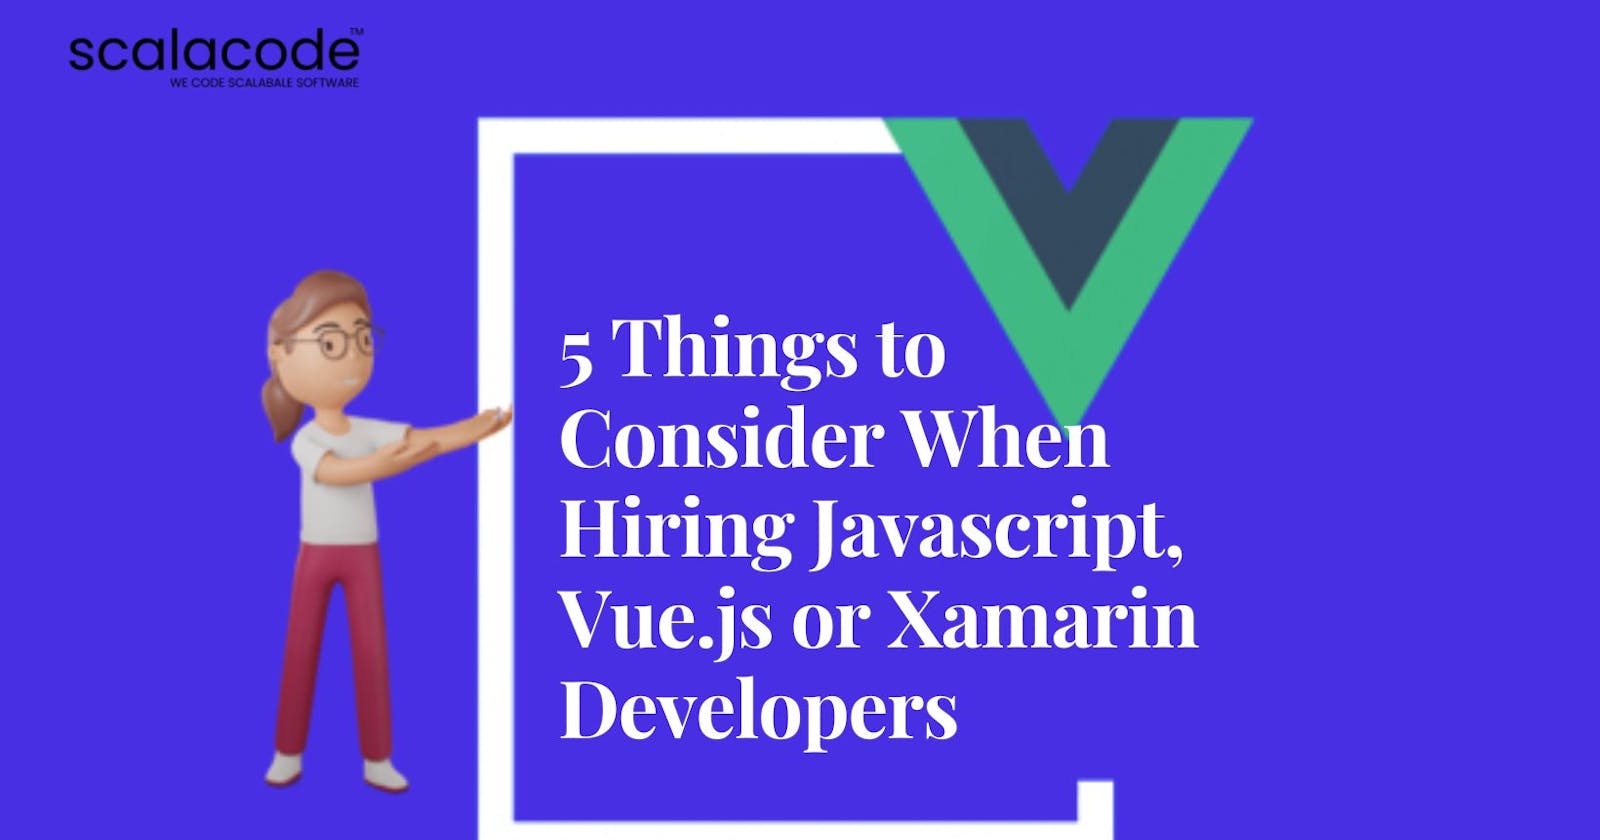 5 Things to Consider When Hiring Javascript, Vue.js or Xamarin Developers